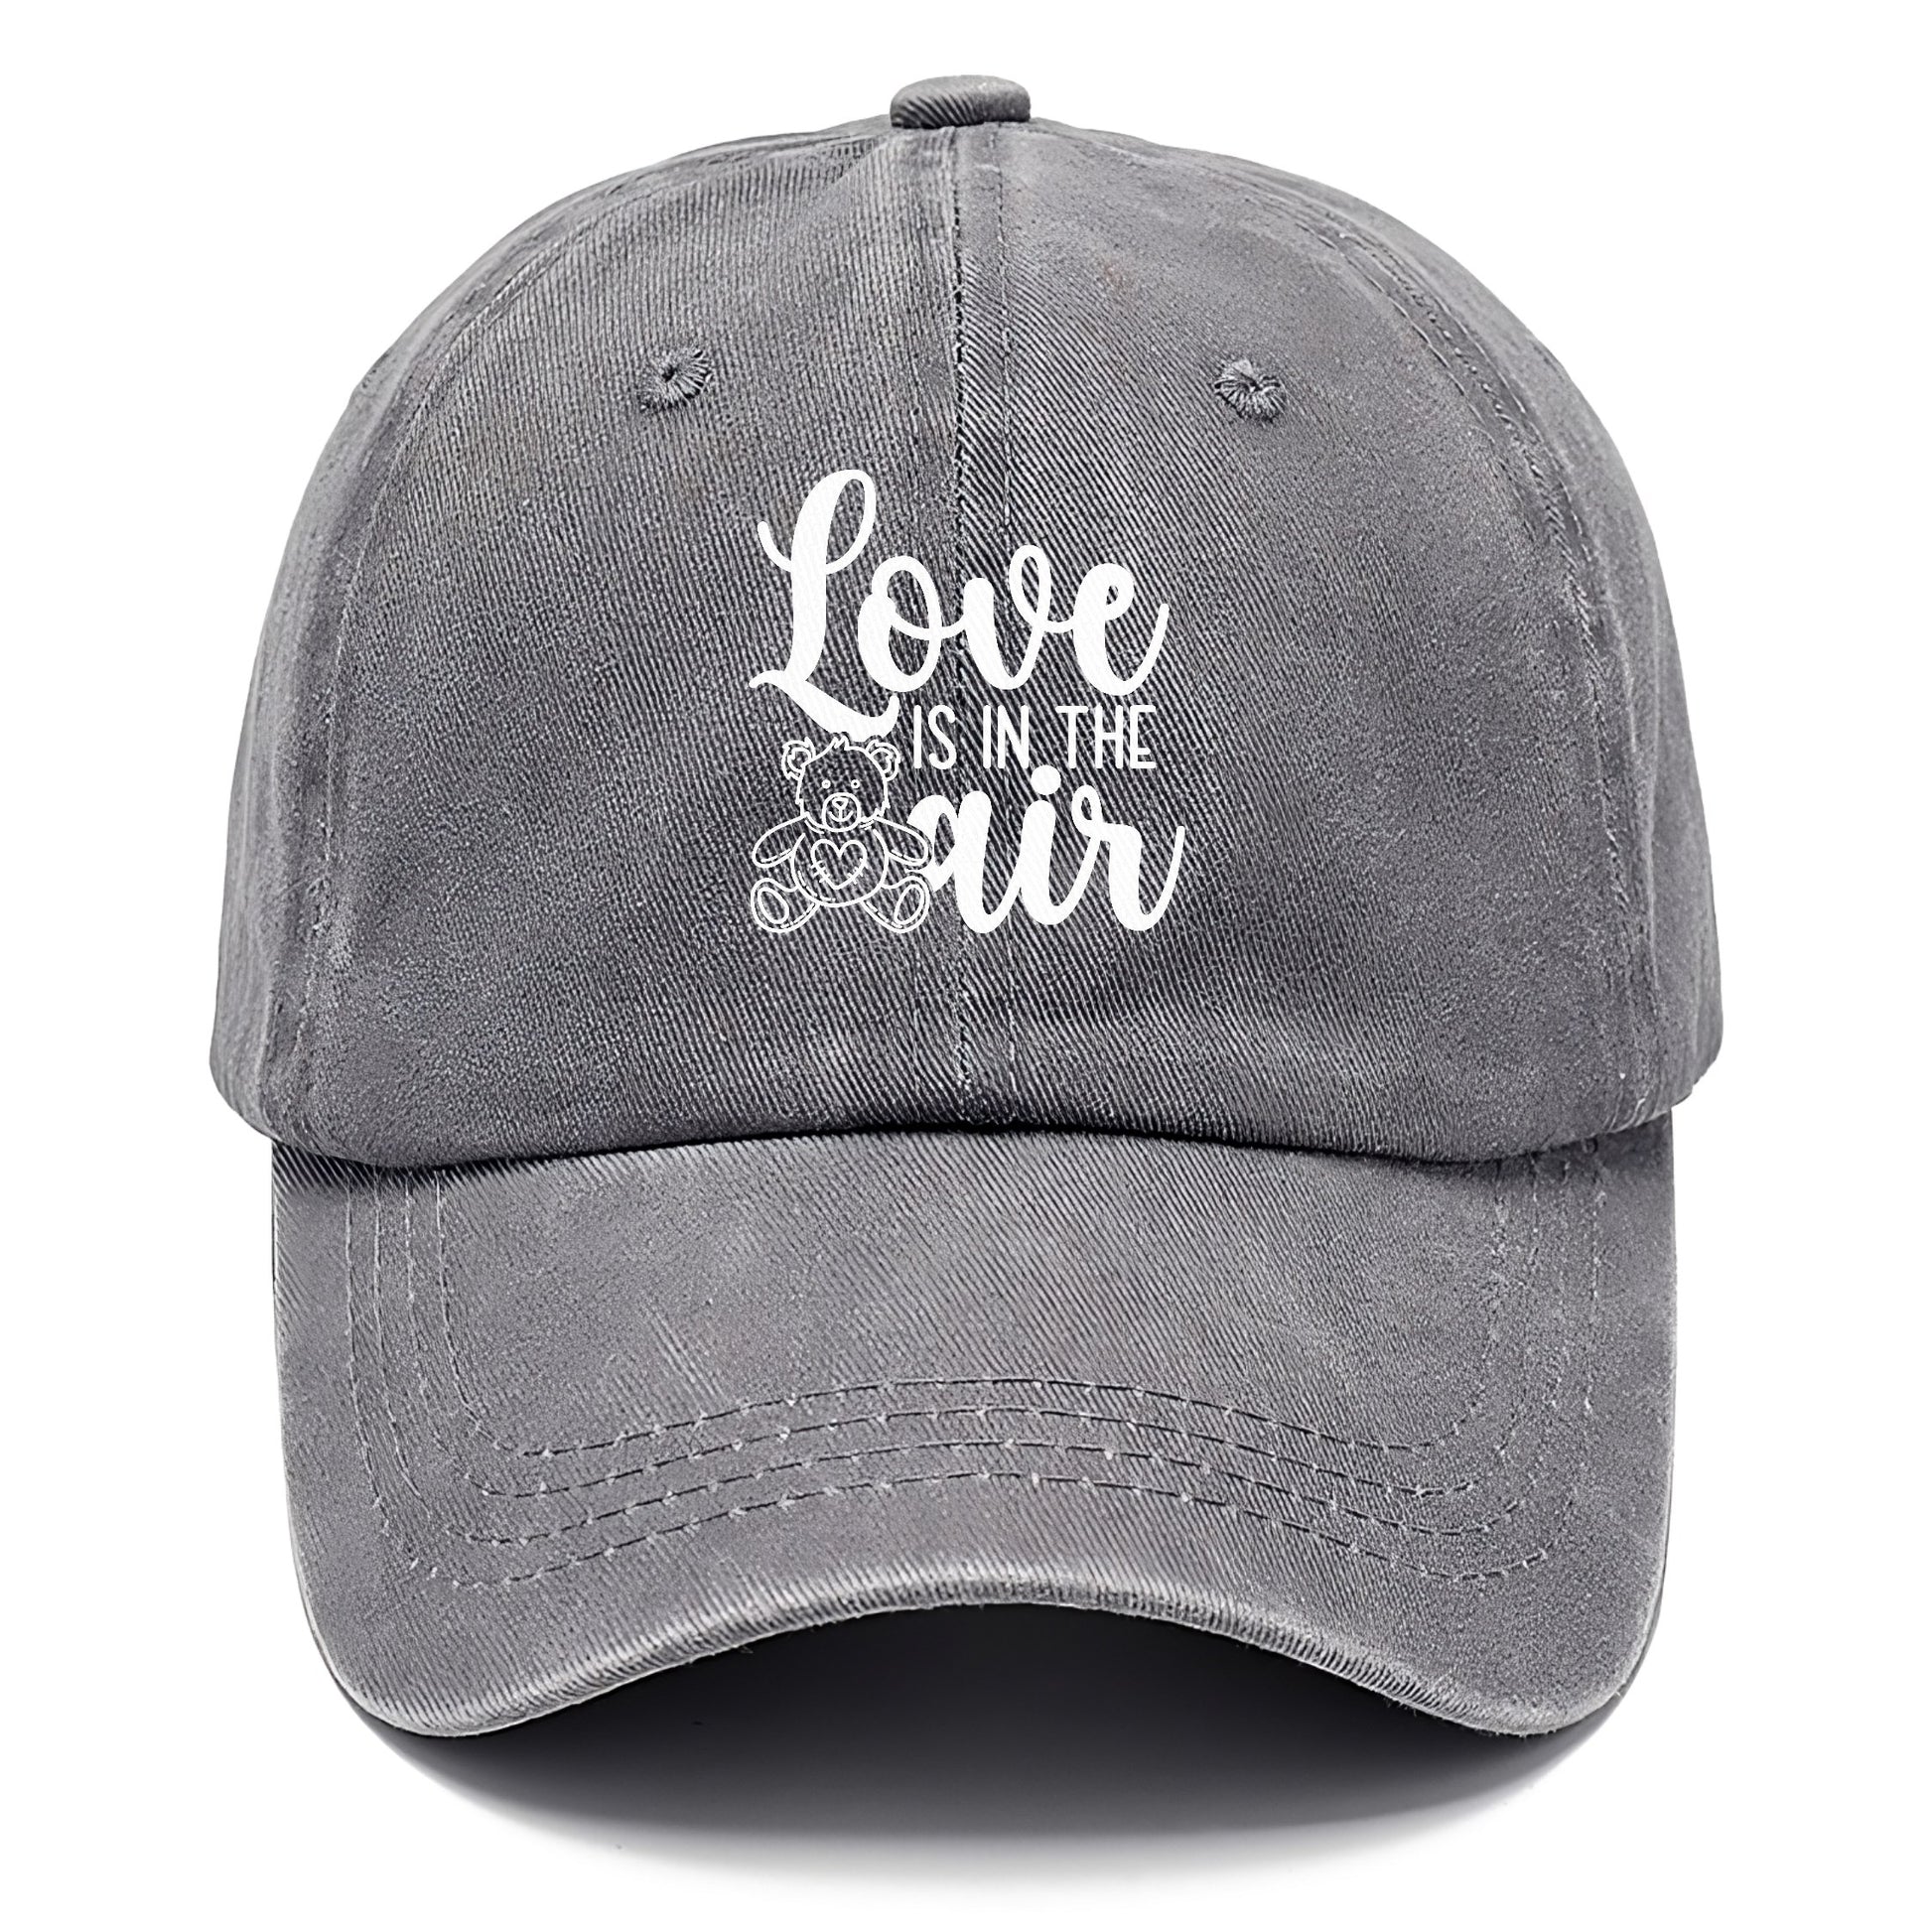 love is in the air Hat